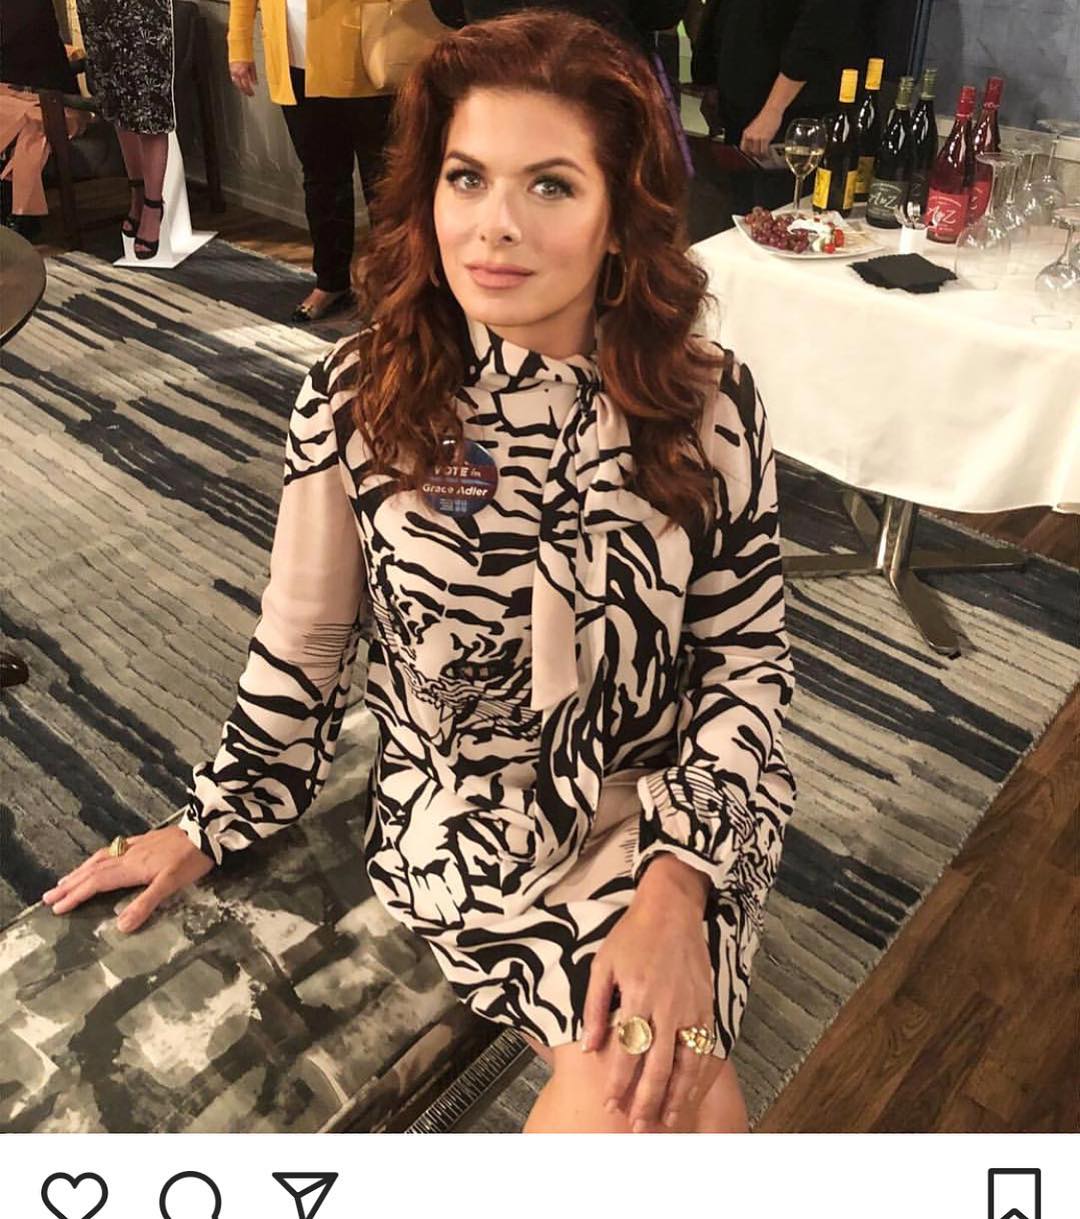 65+ Hot Pictures Of Debra Messing Prove That She Is Still Sexy As Hell | Best Of Comic Books